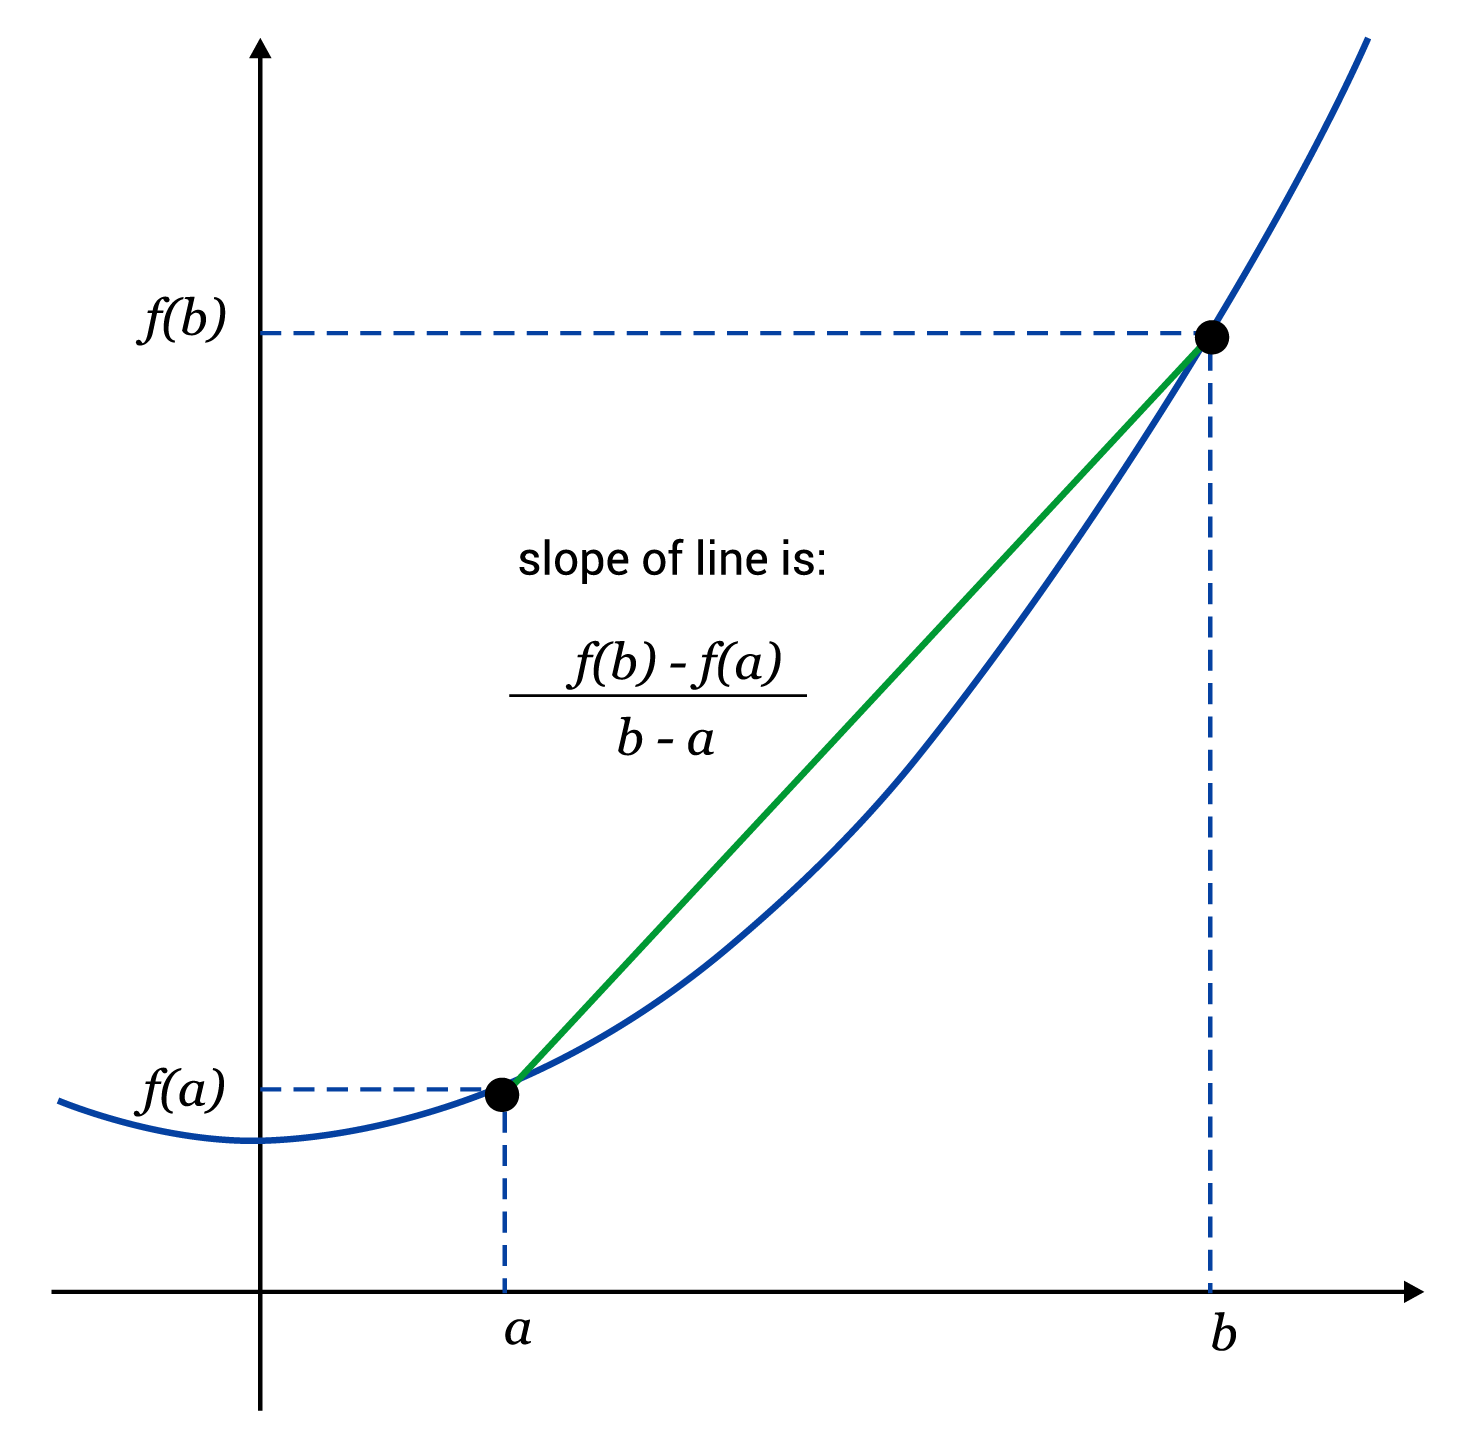 coordinate plane, right part of parabola graphed, point at (a, f of a) and (b, f of b), blue vertical dashed line segment connecting (a, 0) to (a, f of a), blue horizontal dashed line segment connecting (0, f of a) to (a, f of a), blue vertical dashed line segment connecting (b, 0) to (b, f of b), blue horizontal dashed line segment connecting (0, f of b) to (b, f of b), green line segment connecting (a, f of a) and (b, f of b), words in the middle say: "slope of line is: f of b minus f of a, over b minus a"